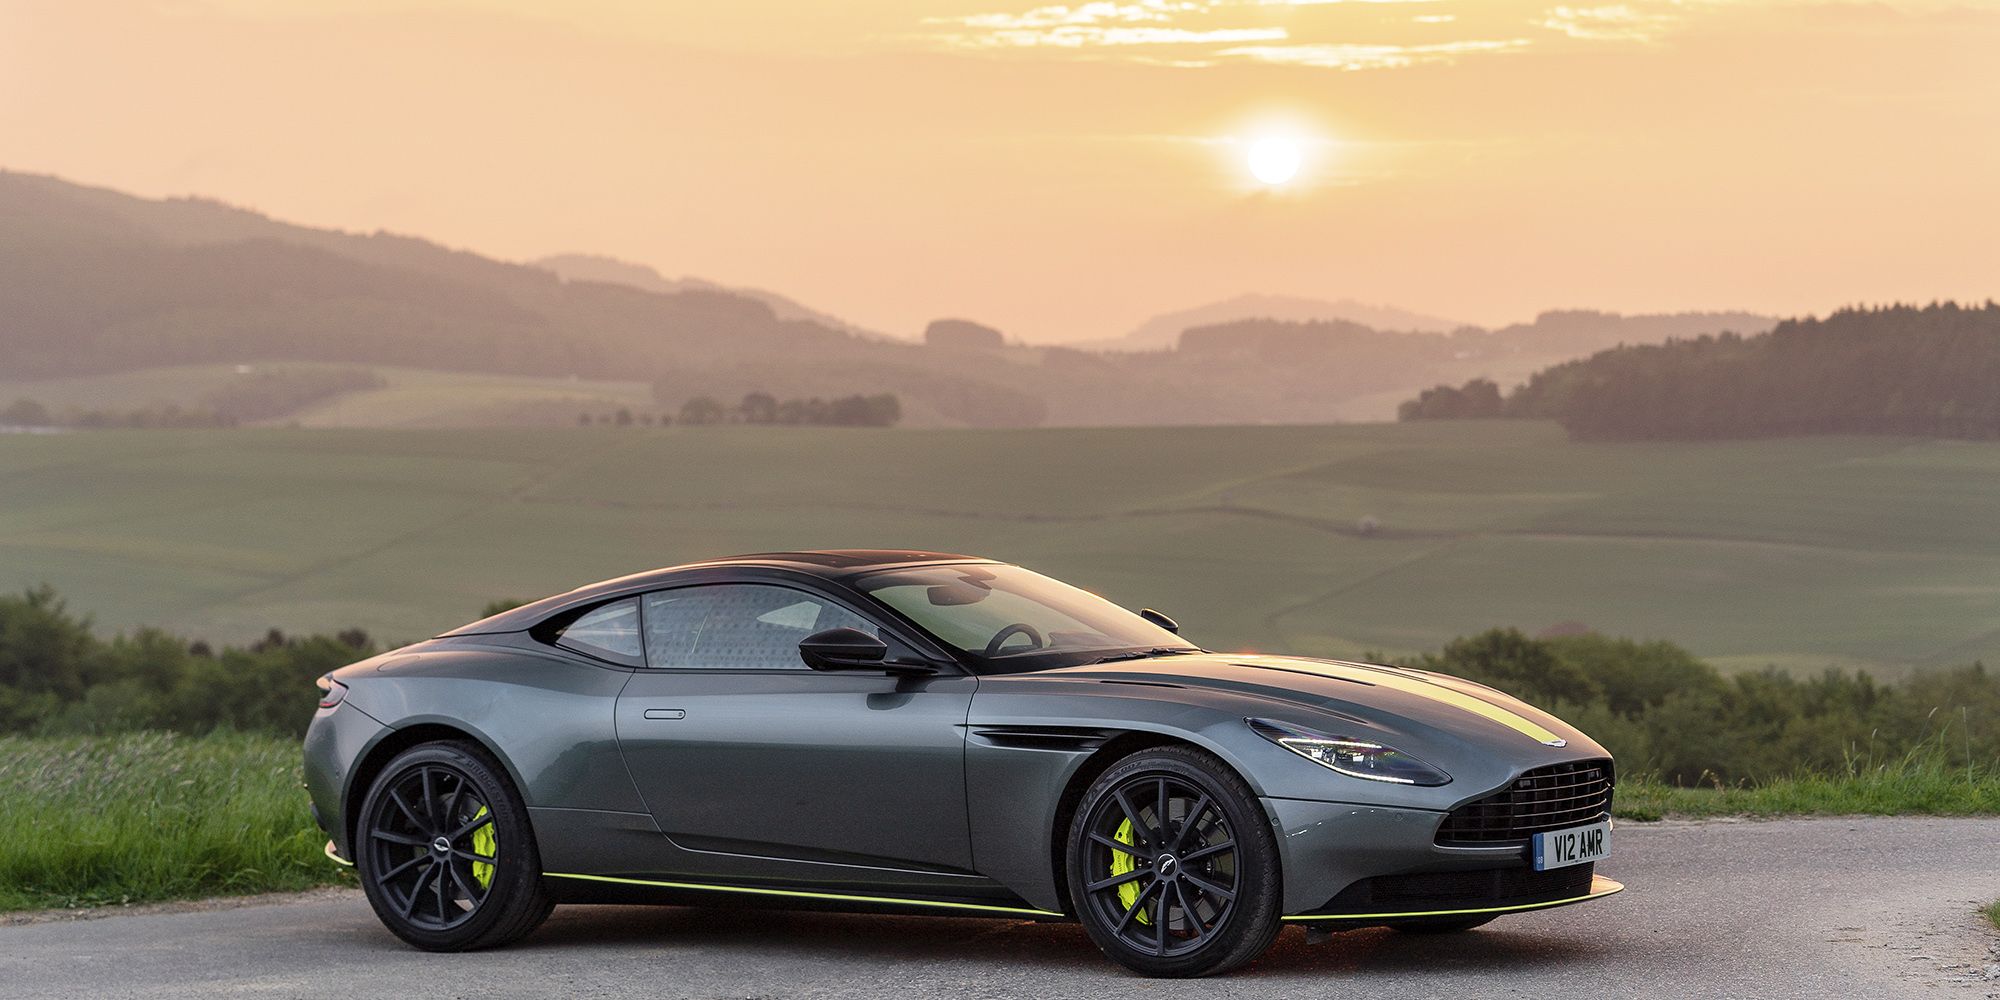 The Aston Martin Db11 Amr Is What The Db11 Always Should Have Been